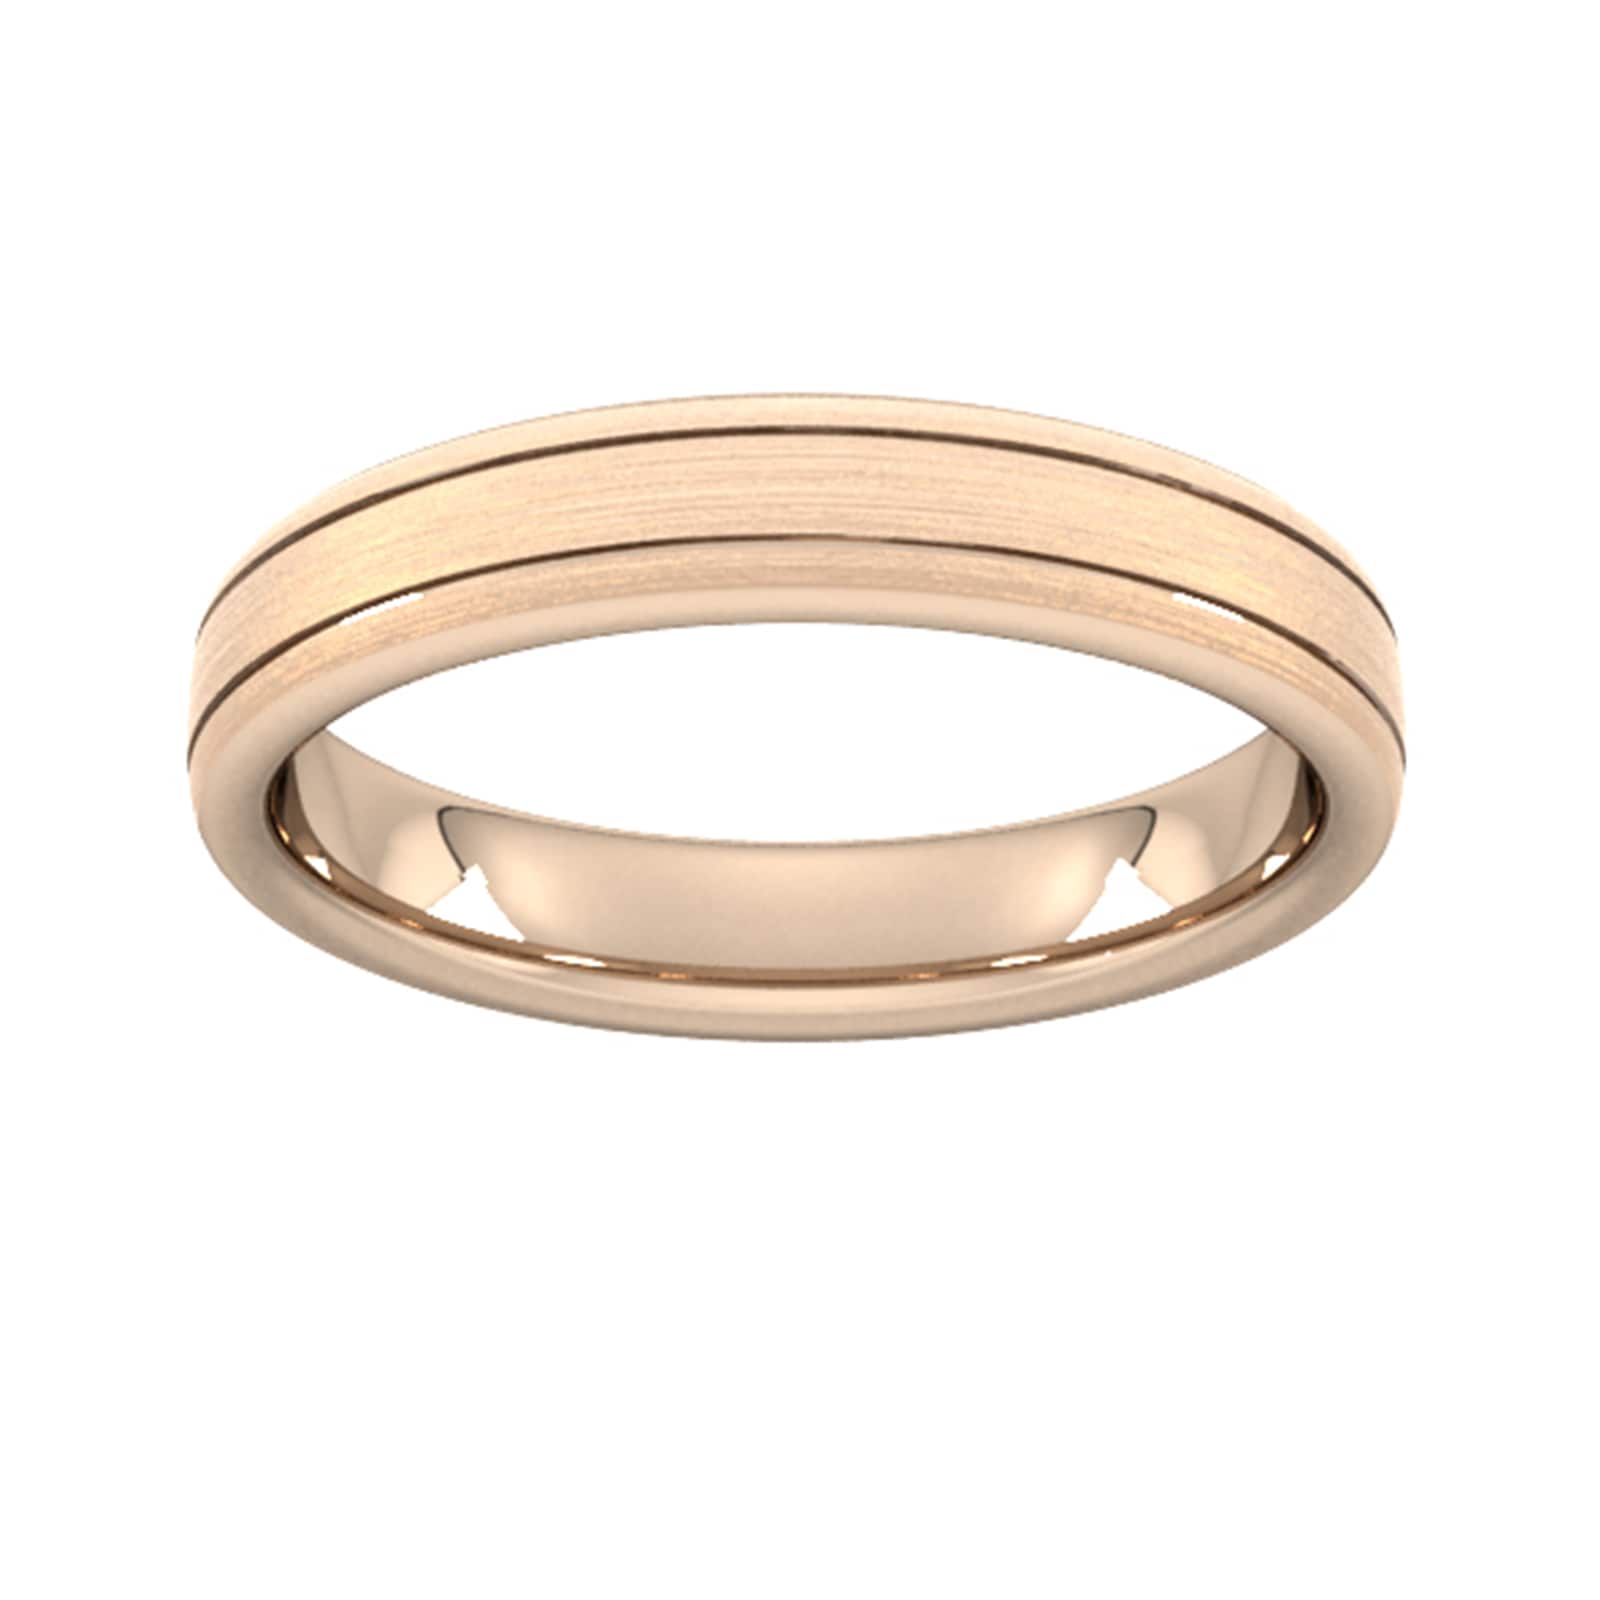 4mm Traditional Court Standard Matt Finish With Double Grooves Wedding Ring In 18 Carat Rose Gold - Ring Size Y